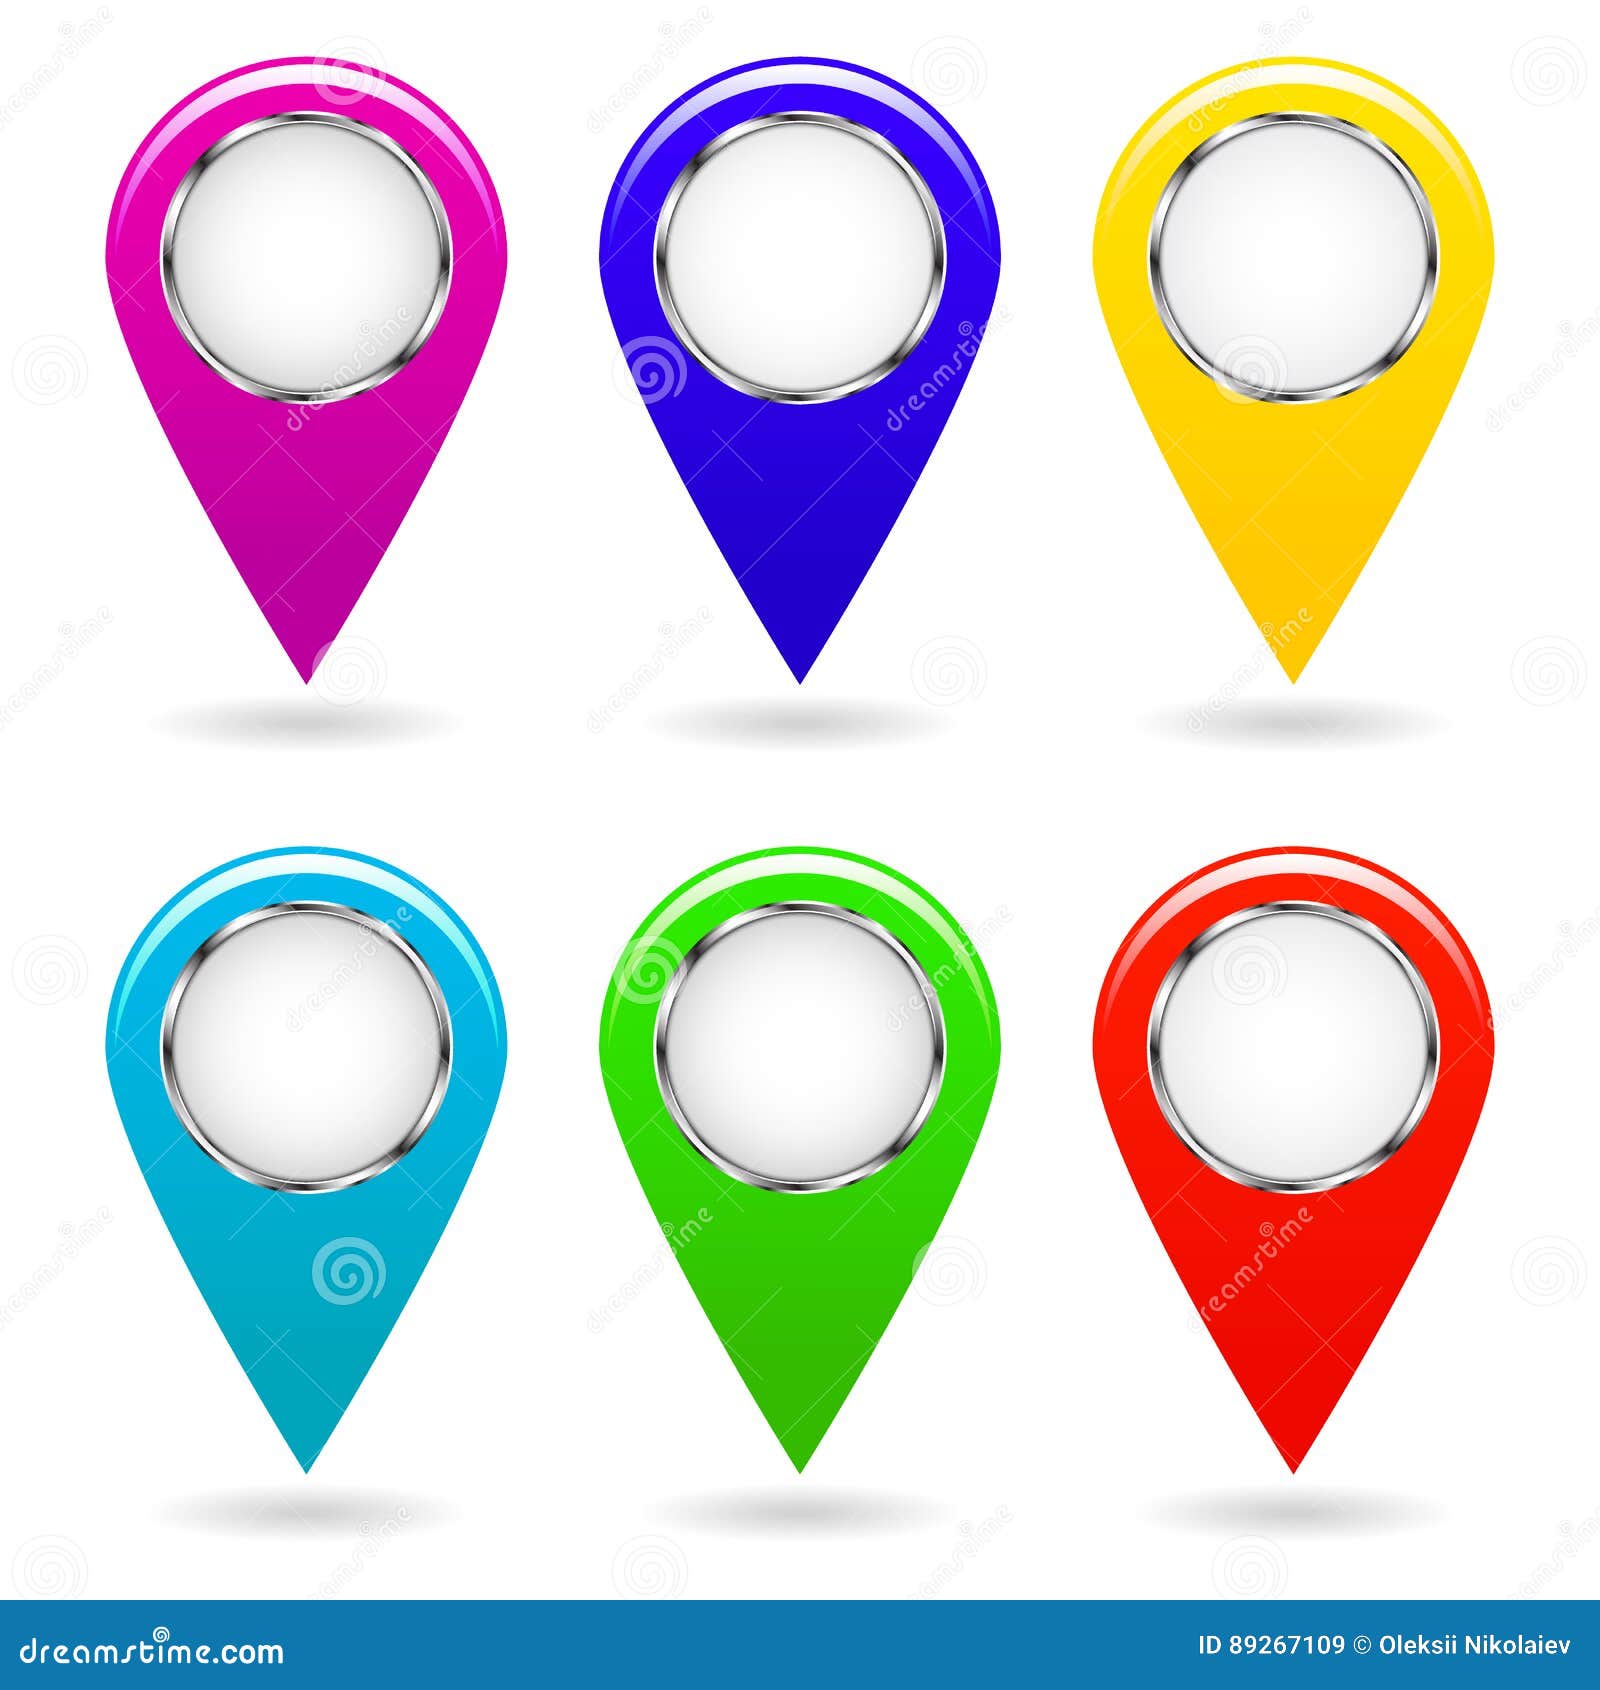 Set Of Colorful Map Pointers Isolated Objects Vector Image Stock